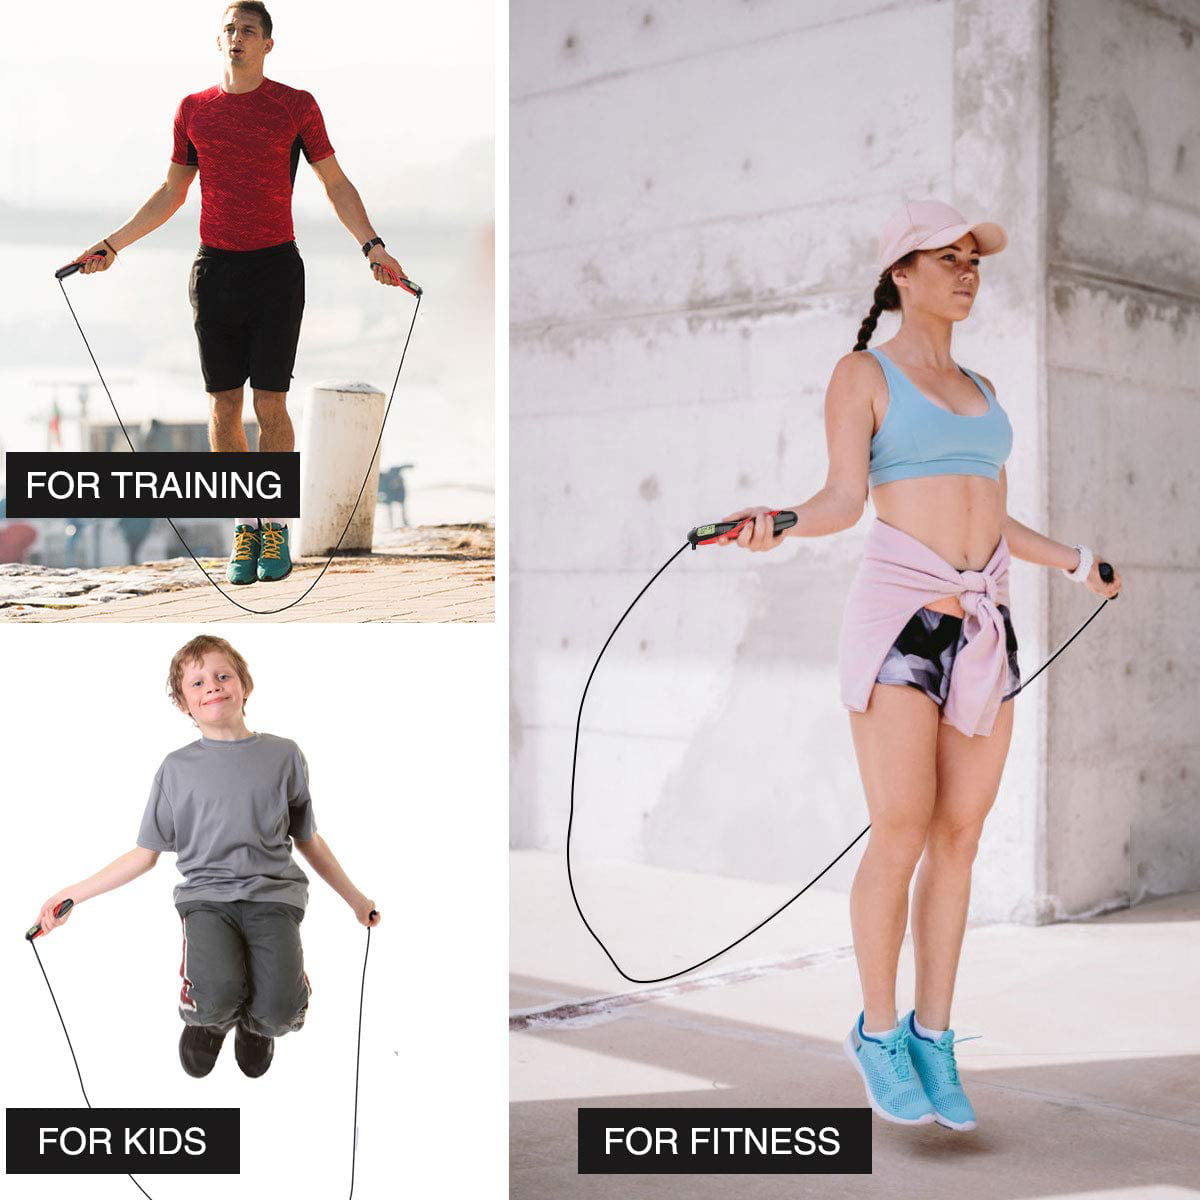 From jumping rope to burpees to zumba, Betts Fit provides the